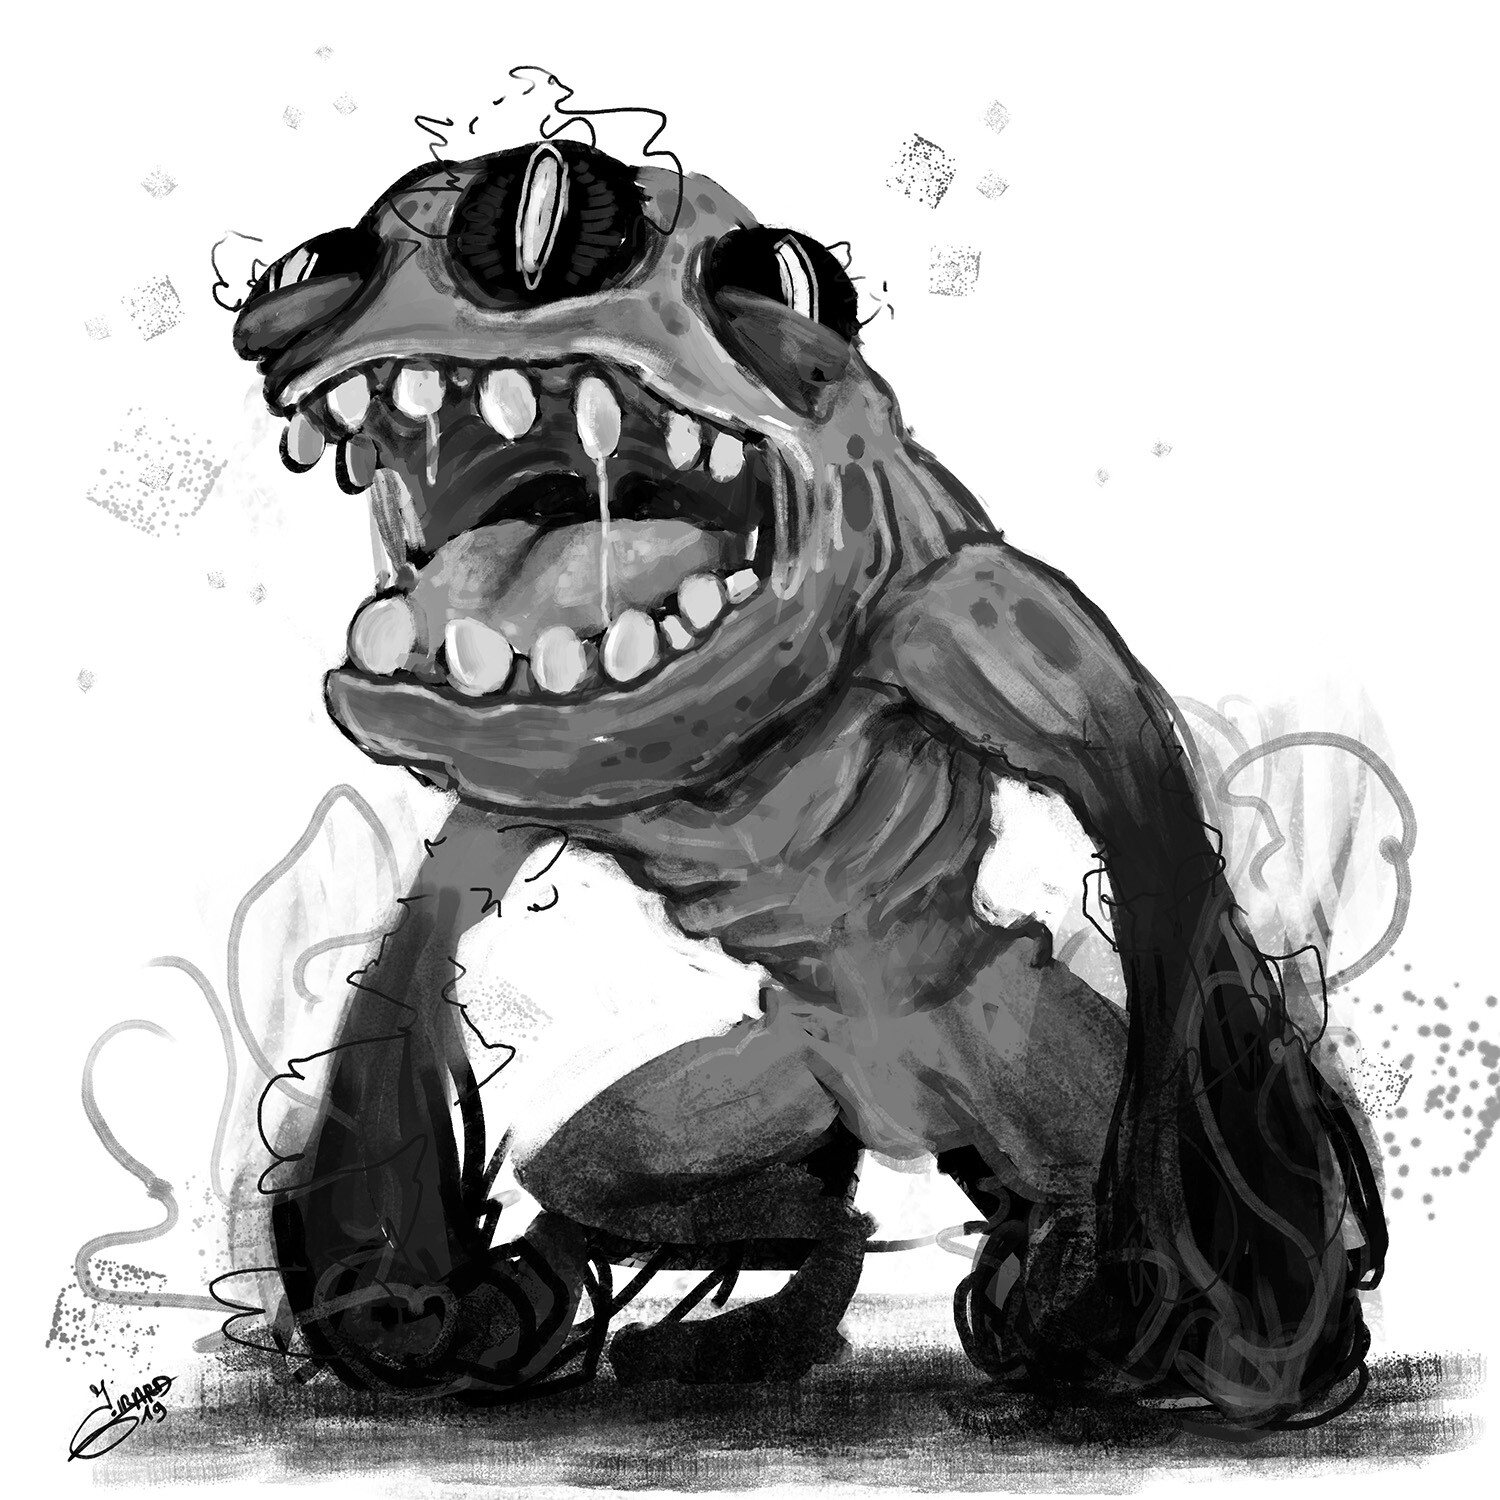 creepy scetches of cartoon monsters